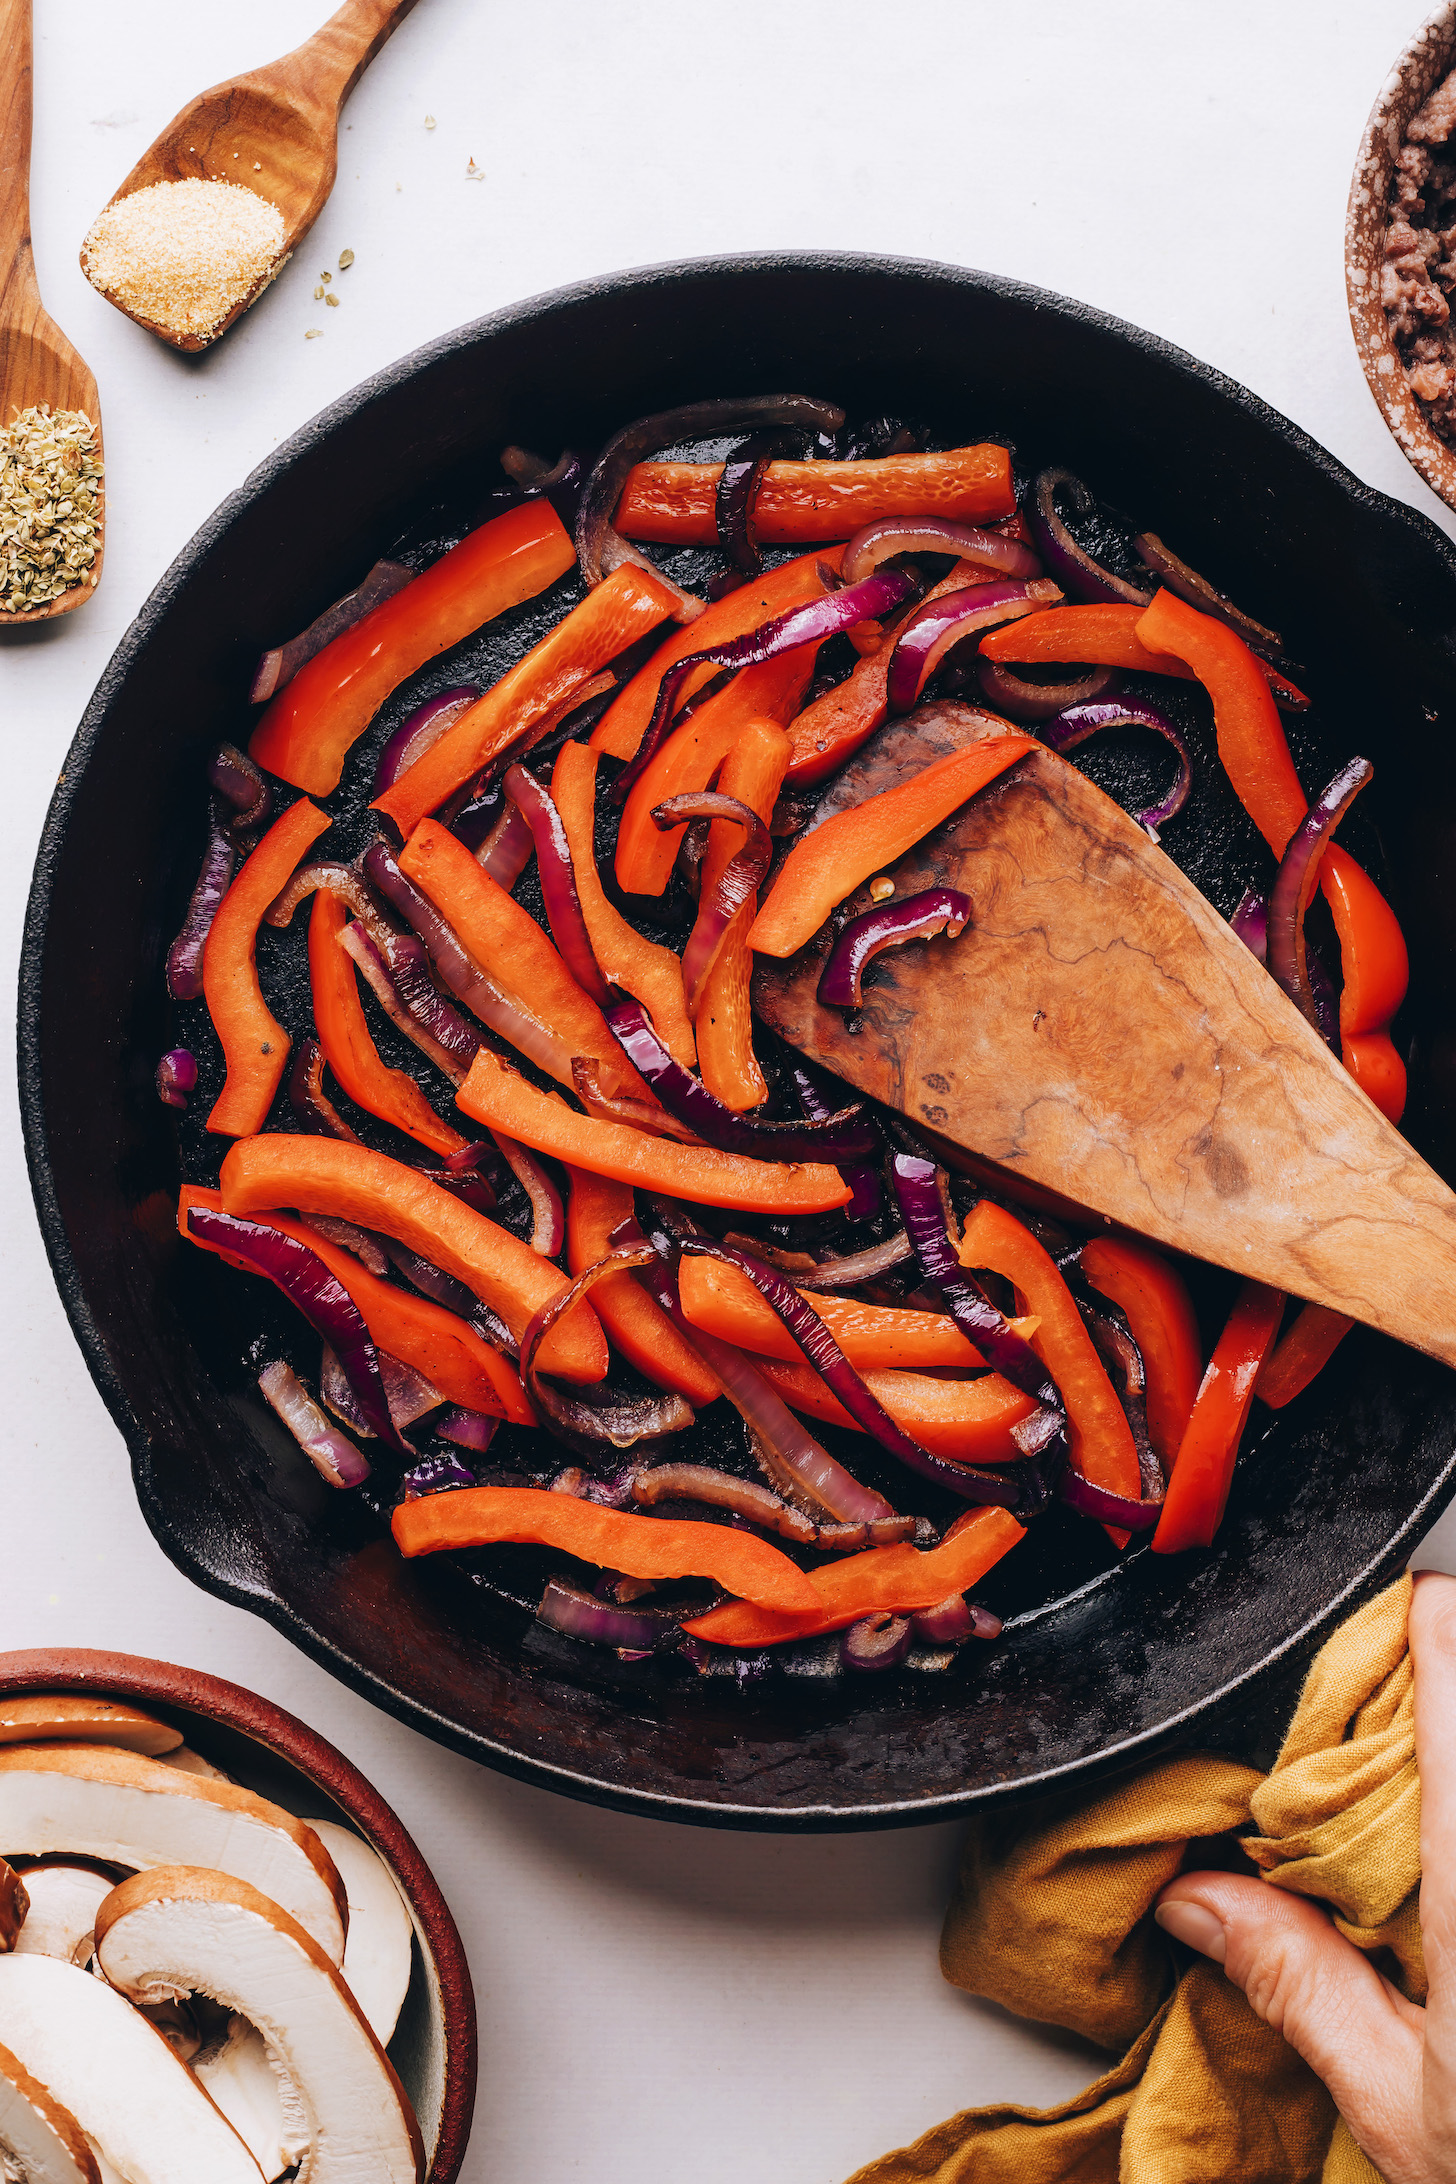 Sautéed red bell pepper and red onion in a cast iron skillet